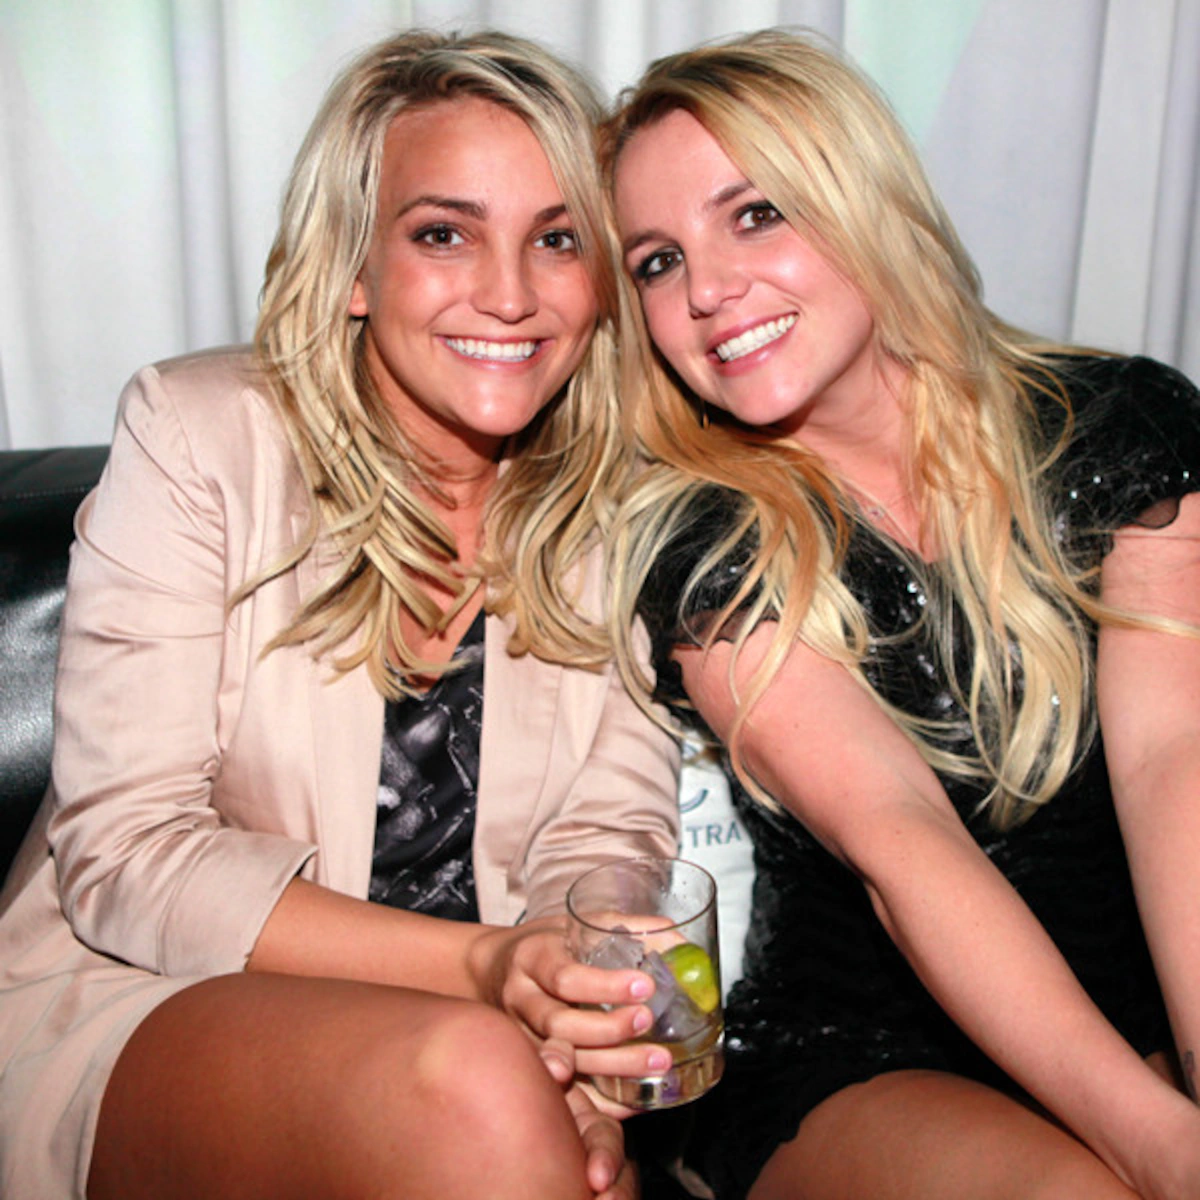 Jamie Lynn Spears talks her version of her fight with Britney